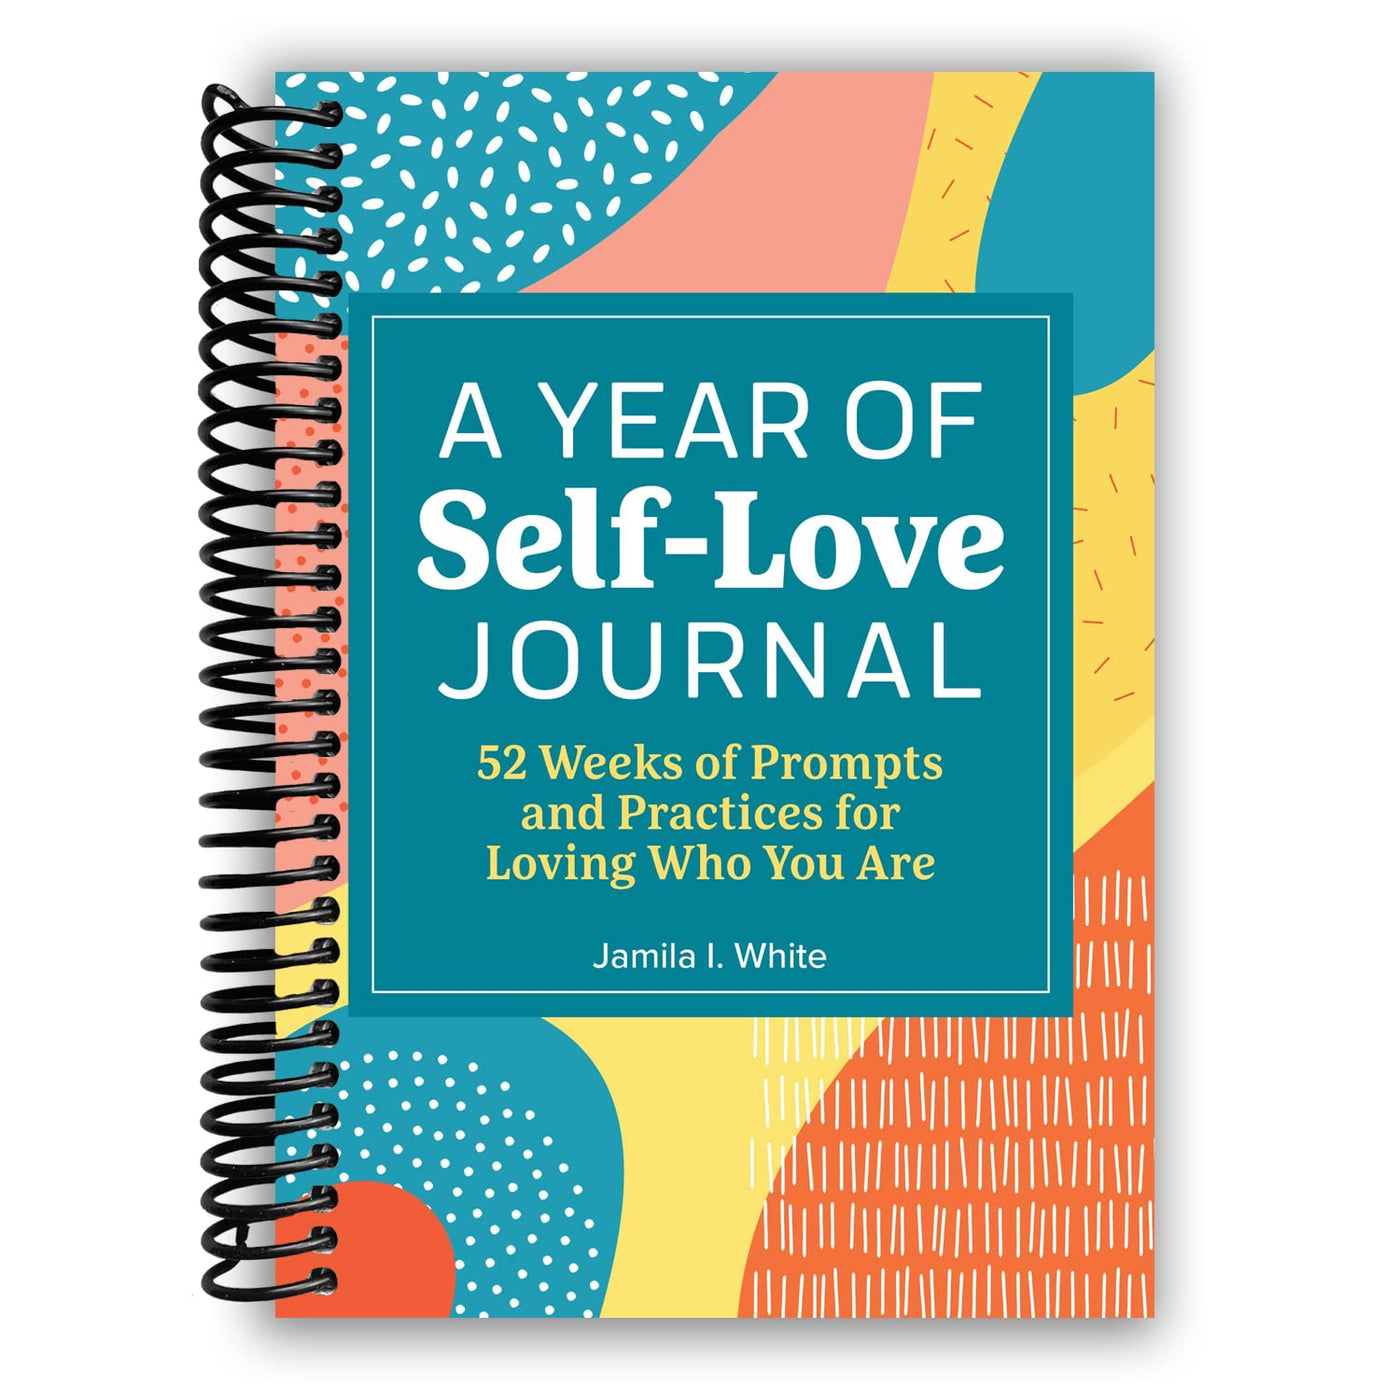 A Year of Self-Love Journal: 52 Weeks of Prompts and Practices for Loving Who You Are (Spiral Bound)